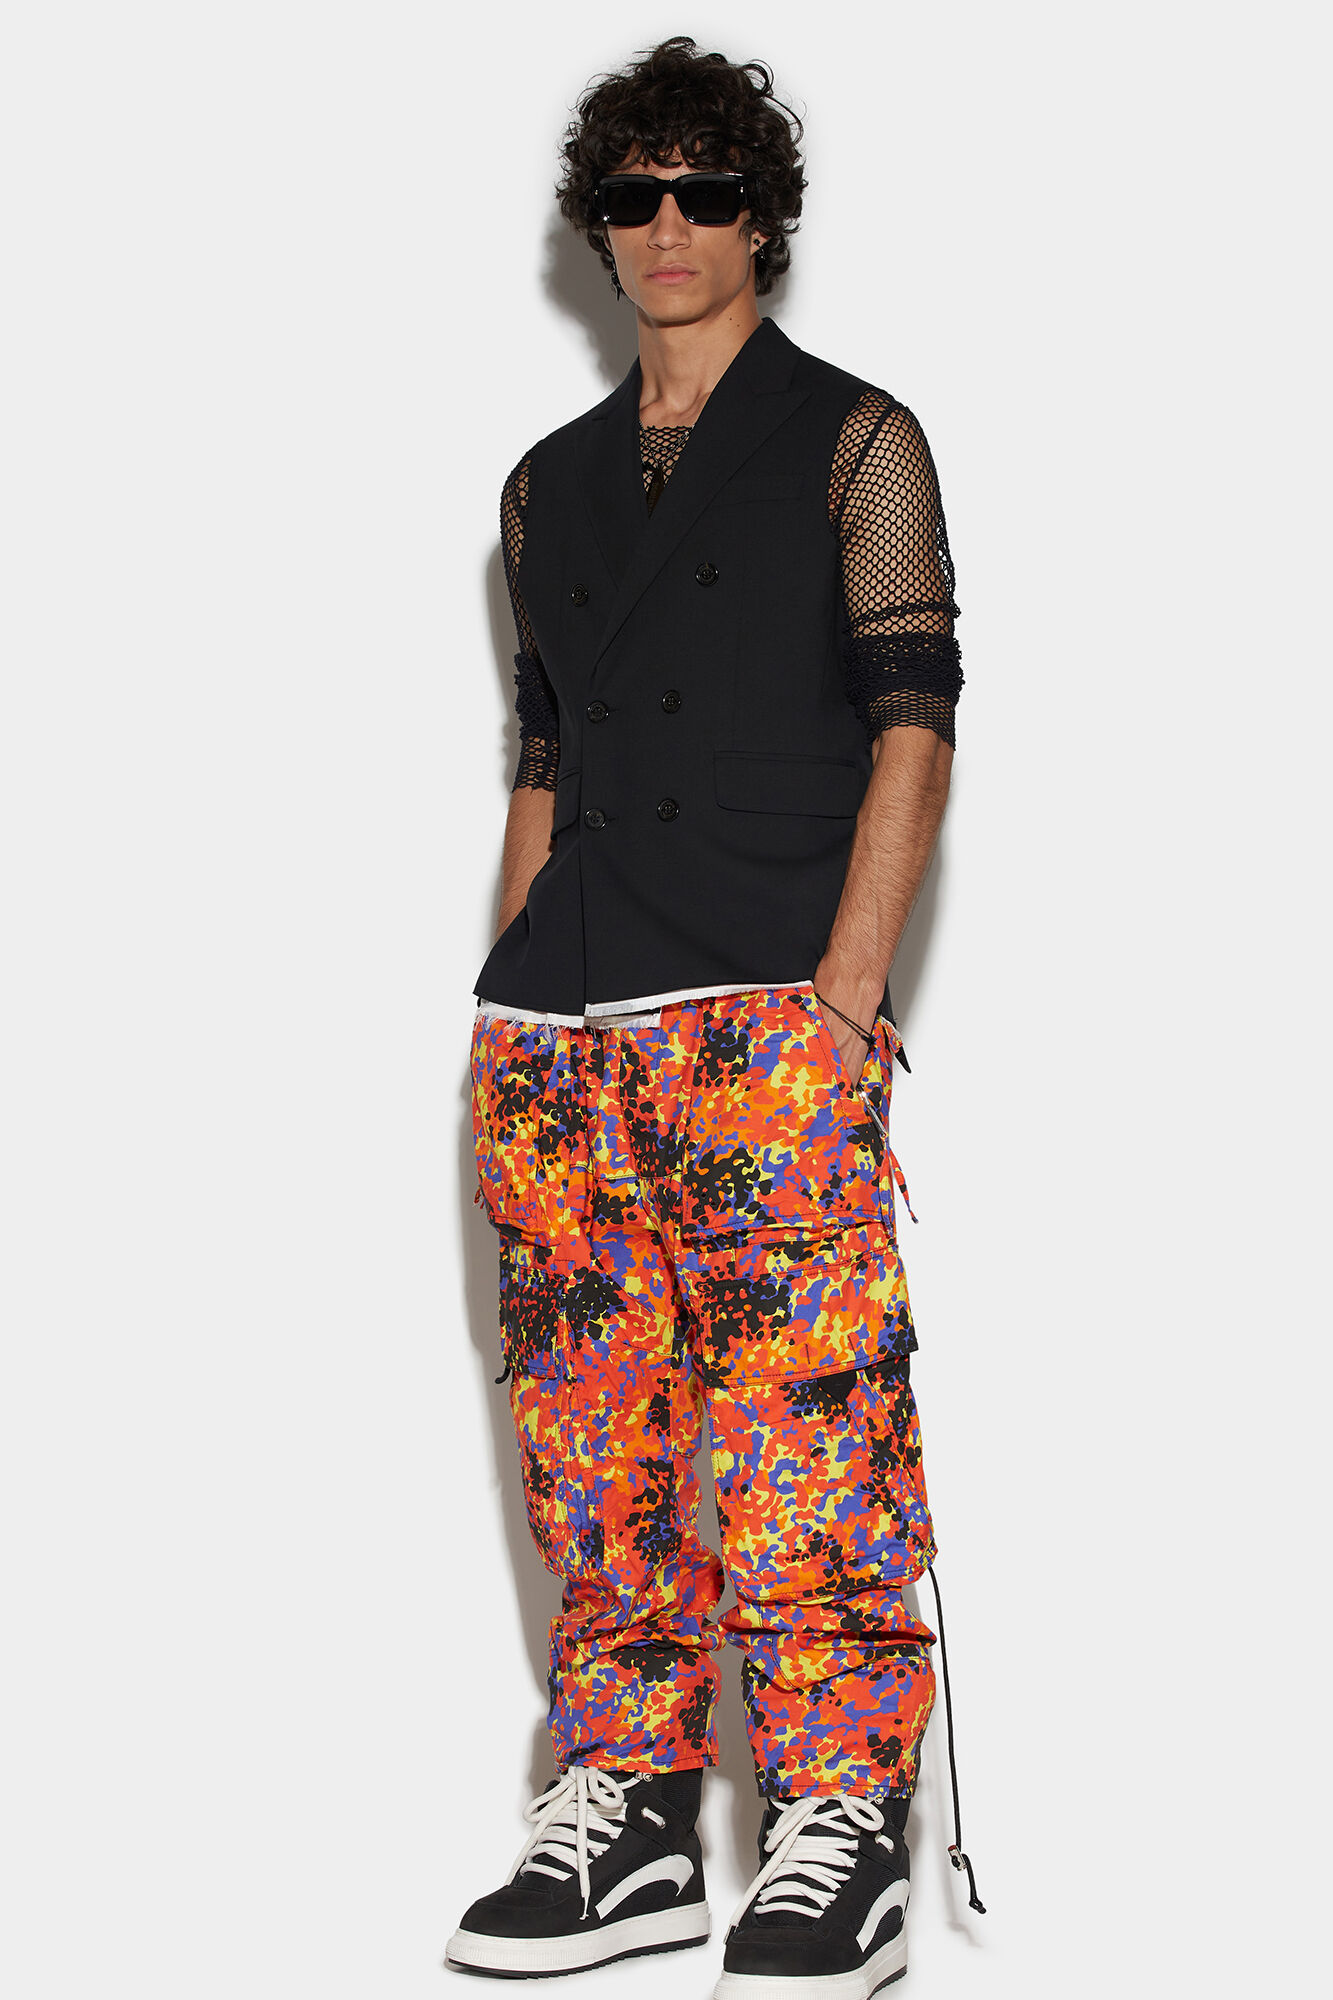 PANT for Men  Buy Camo Print Cargo Pants Online at Forever21  0